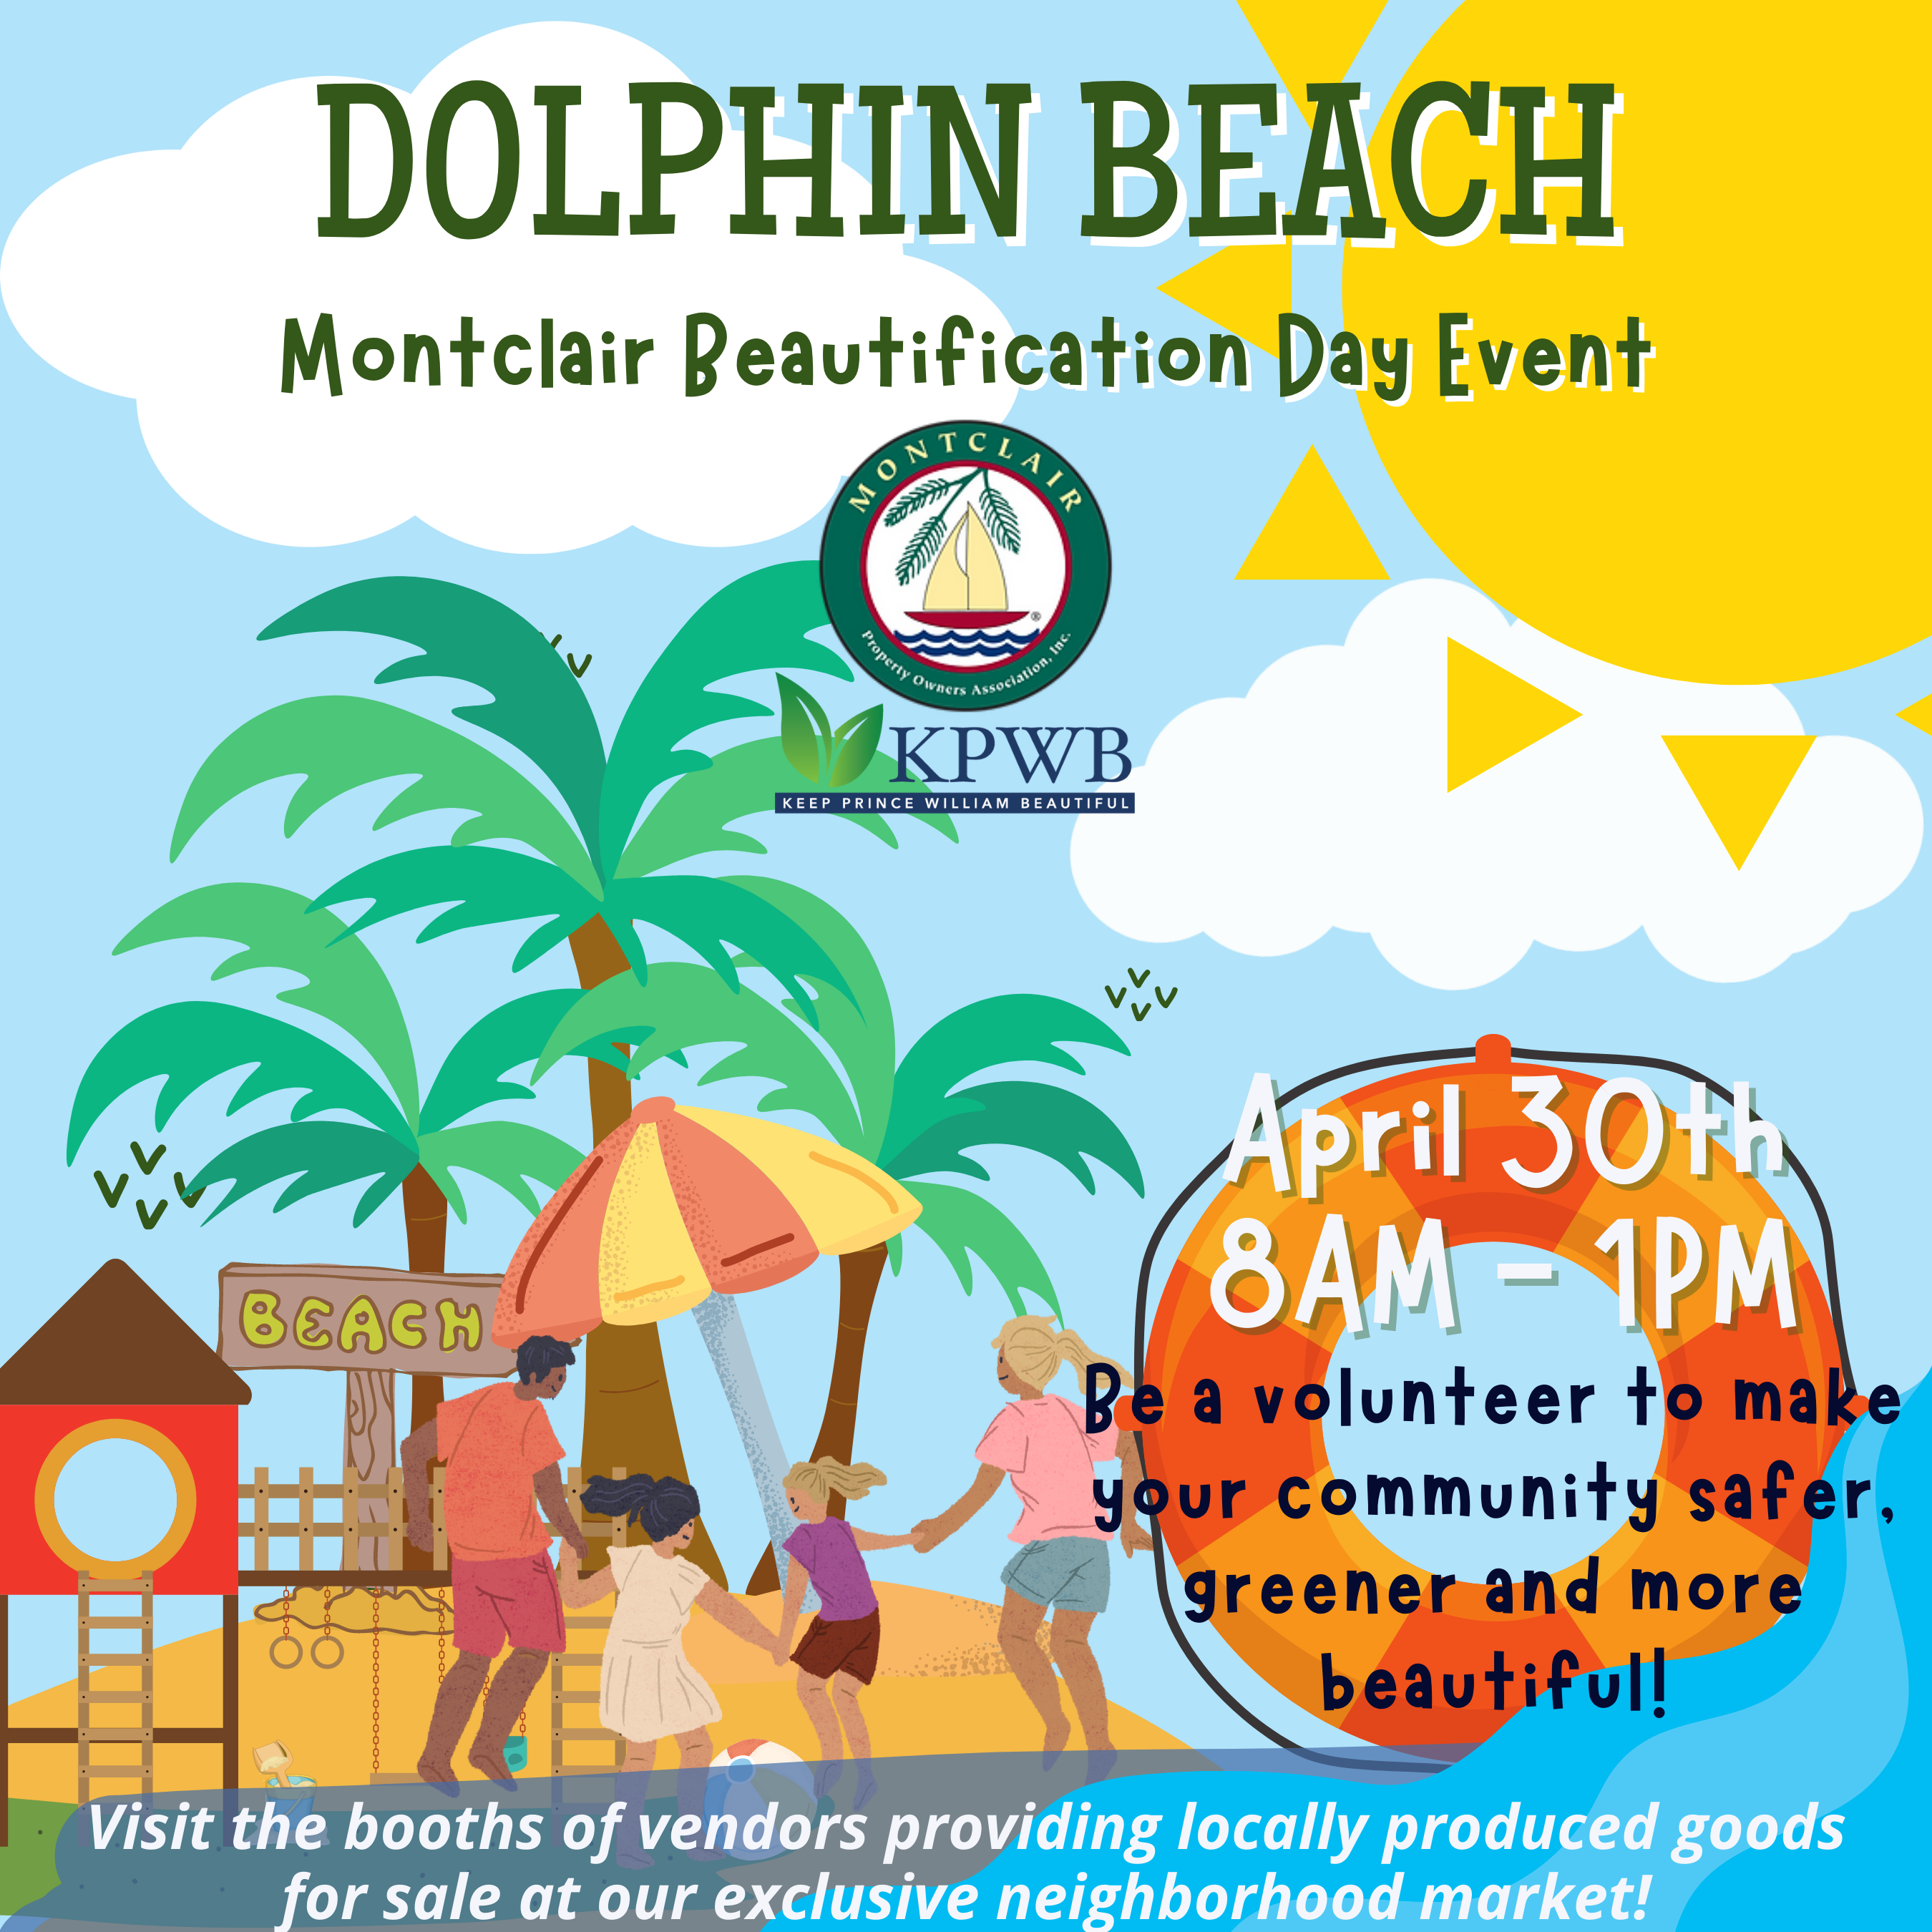 Dolphin Beach Event - Montclair Beautification Day